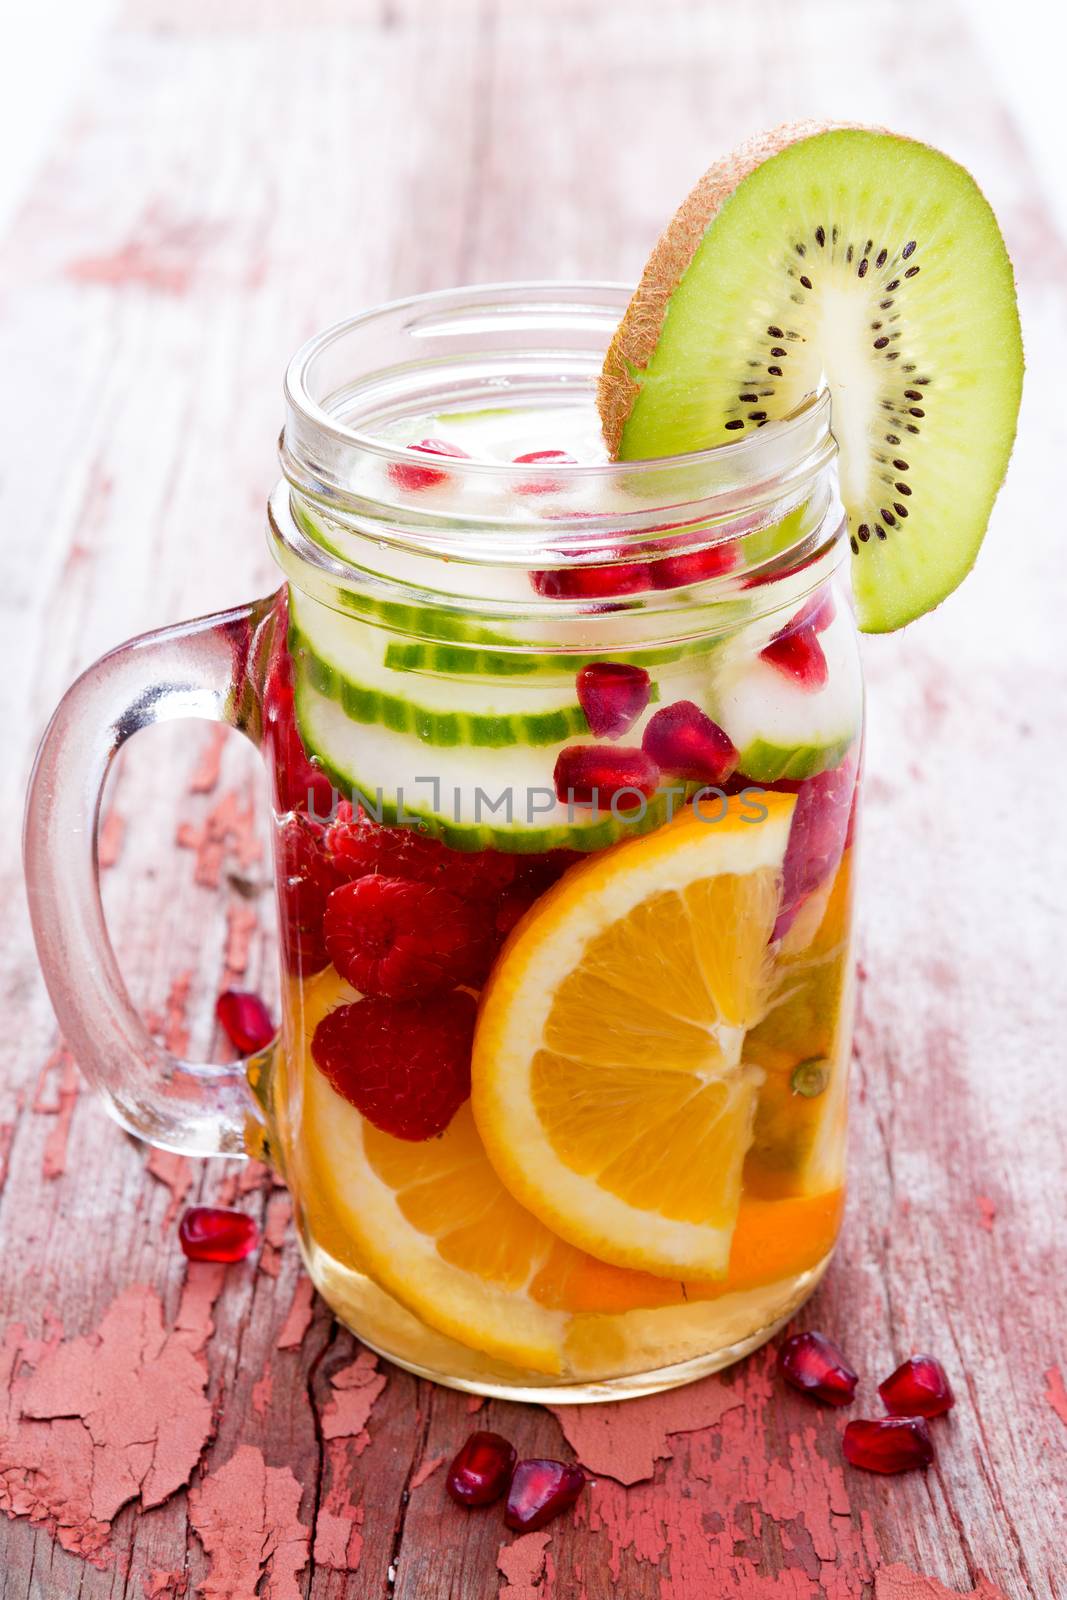 Fresh fruit and water filled mason jar with sliced oranges, cucumber, raspberries, pomegranate and kiwifruit for a delicious refreshing healthy drink on a rustic wooden table with peeling paint